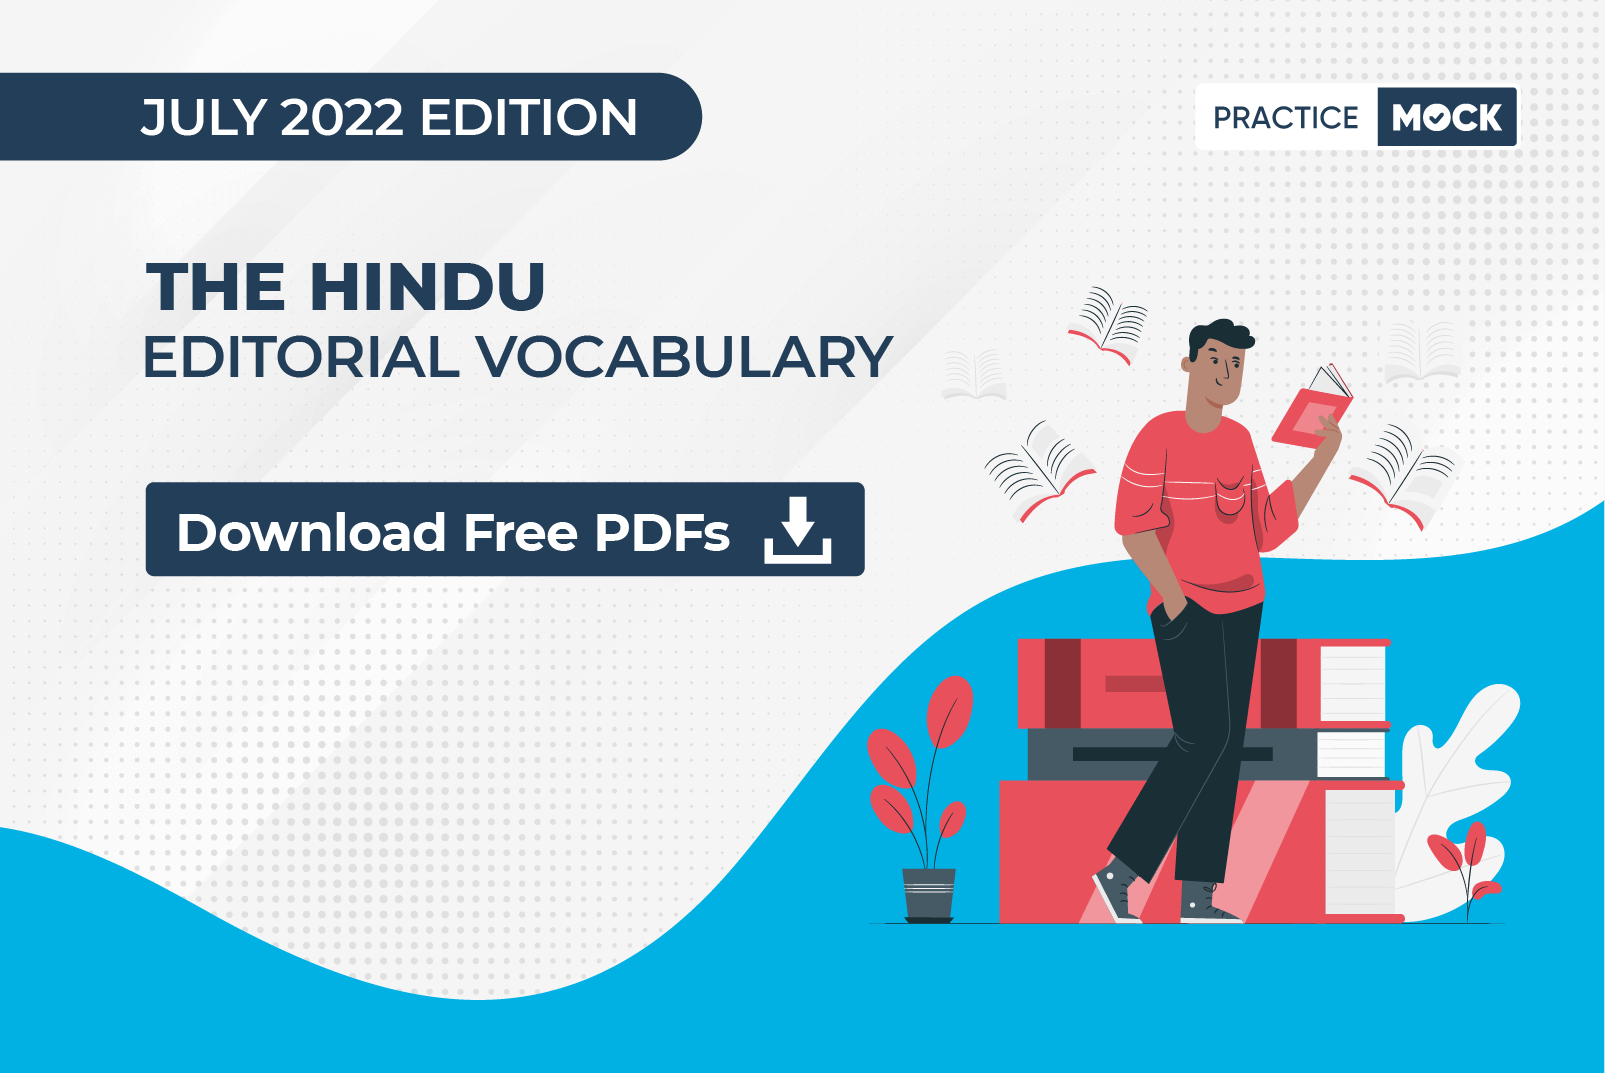 The Hindu Editorial Vocabulary- Download Free PDF- July Edition